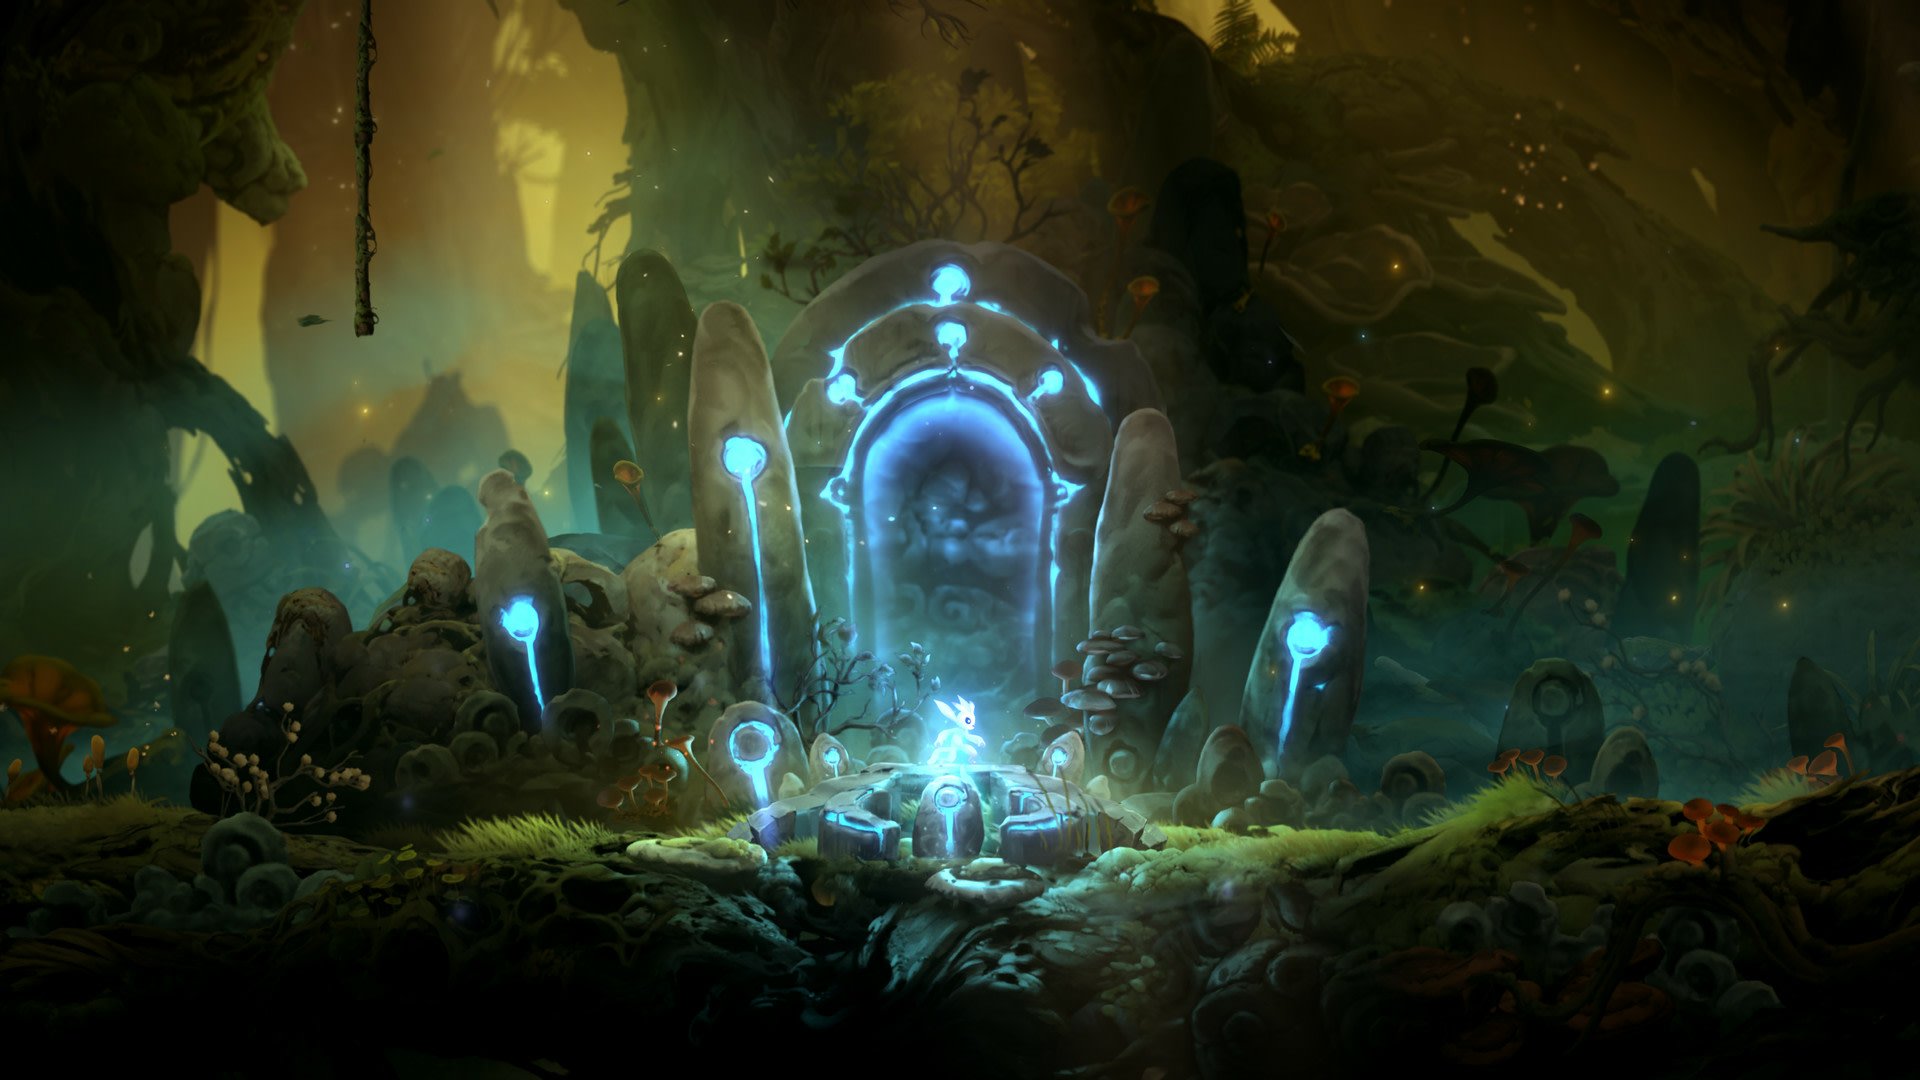 ori and the will of the wisps background